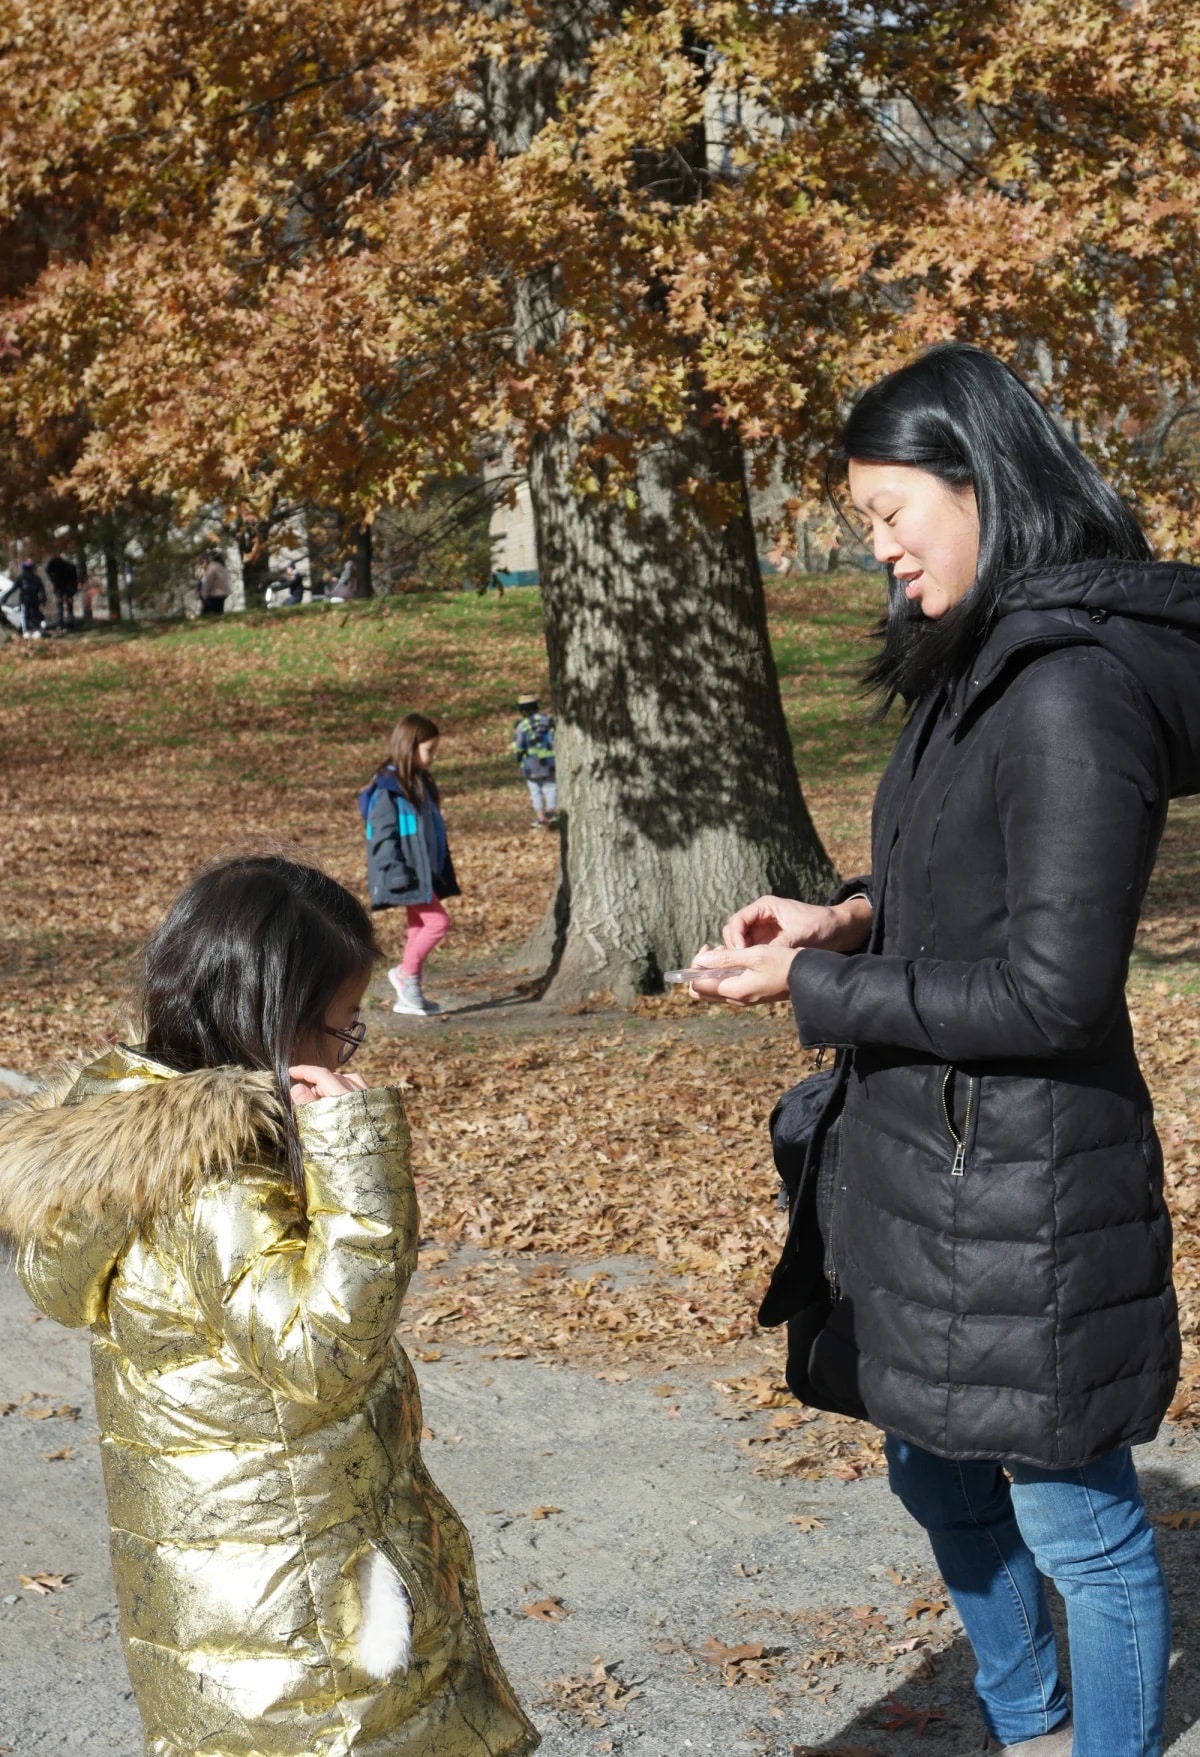 A lower school student in a shiny gold coat talks to a teacher with Central Park behind them